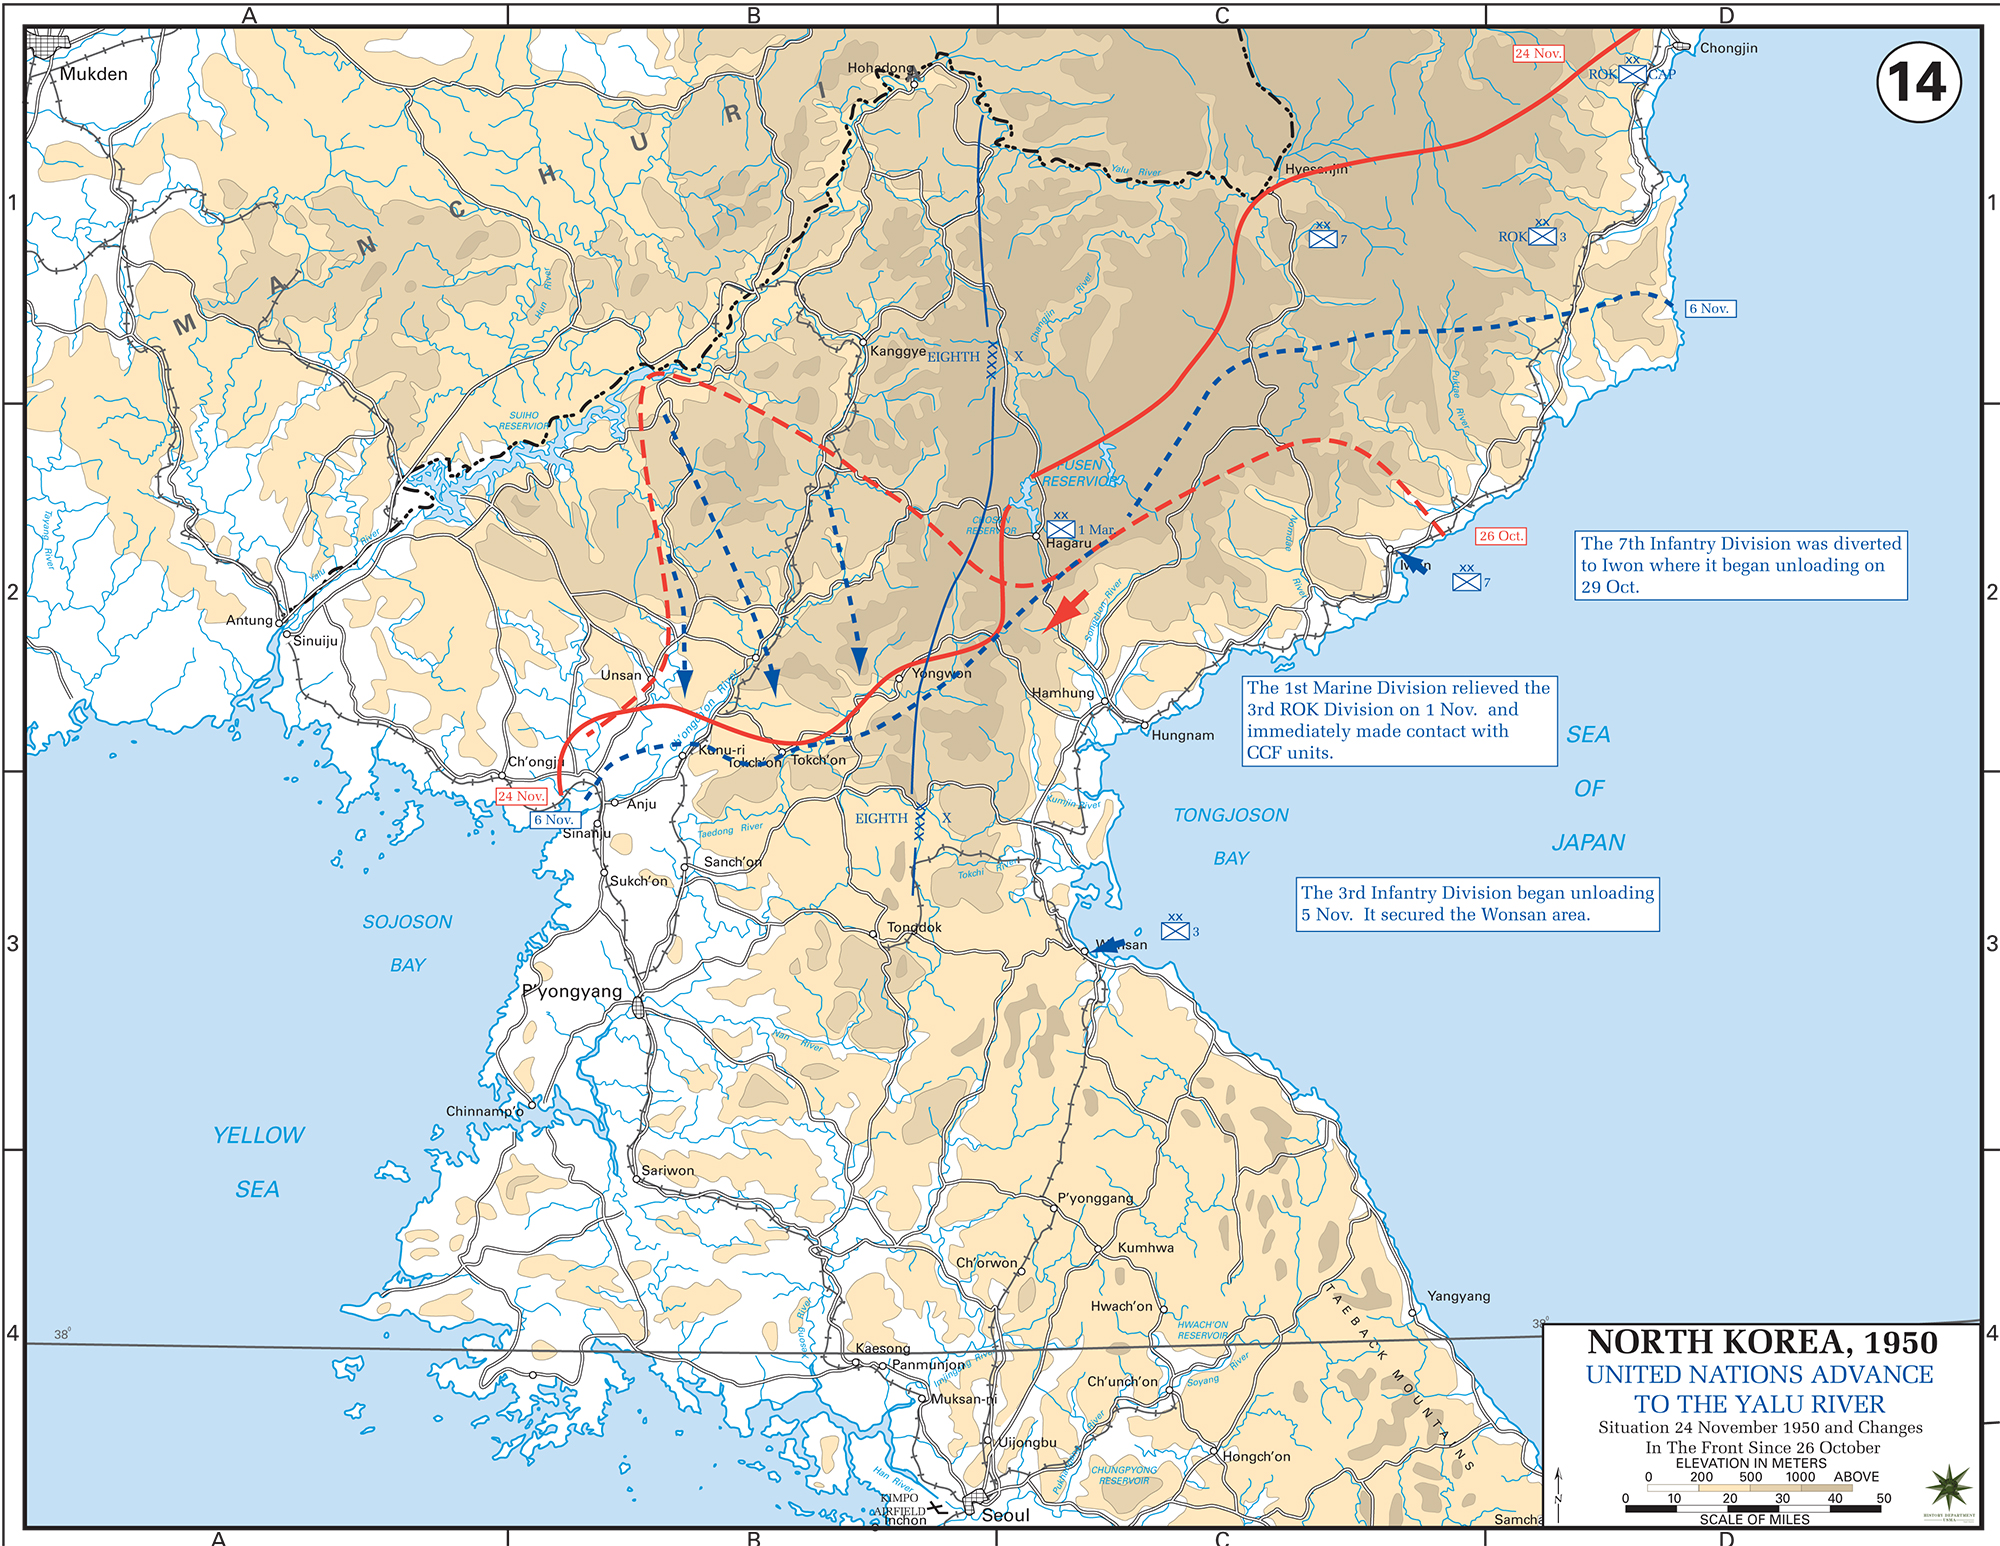 Map of the Korean War: North Korea. U.N. Advance to the Yalu River, Situation November 24, 1950, Operations Since October 26, 1950.